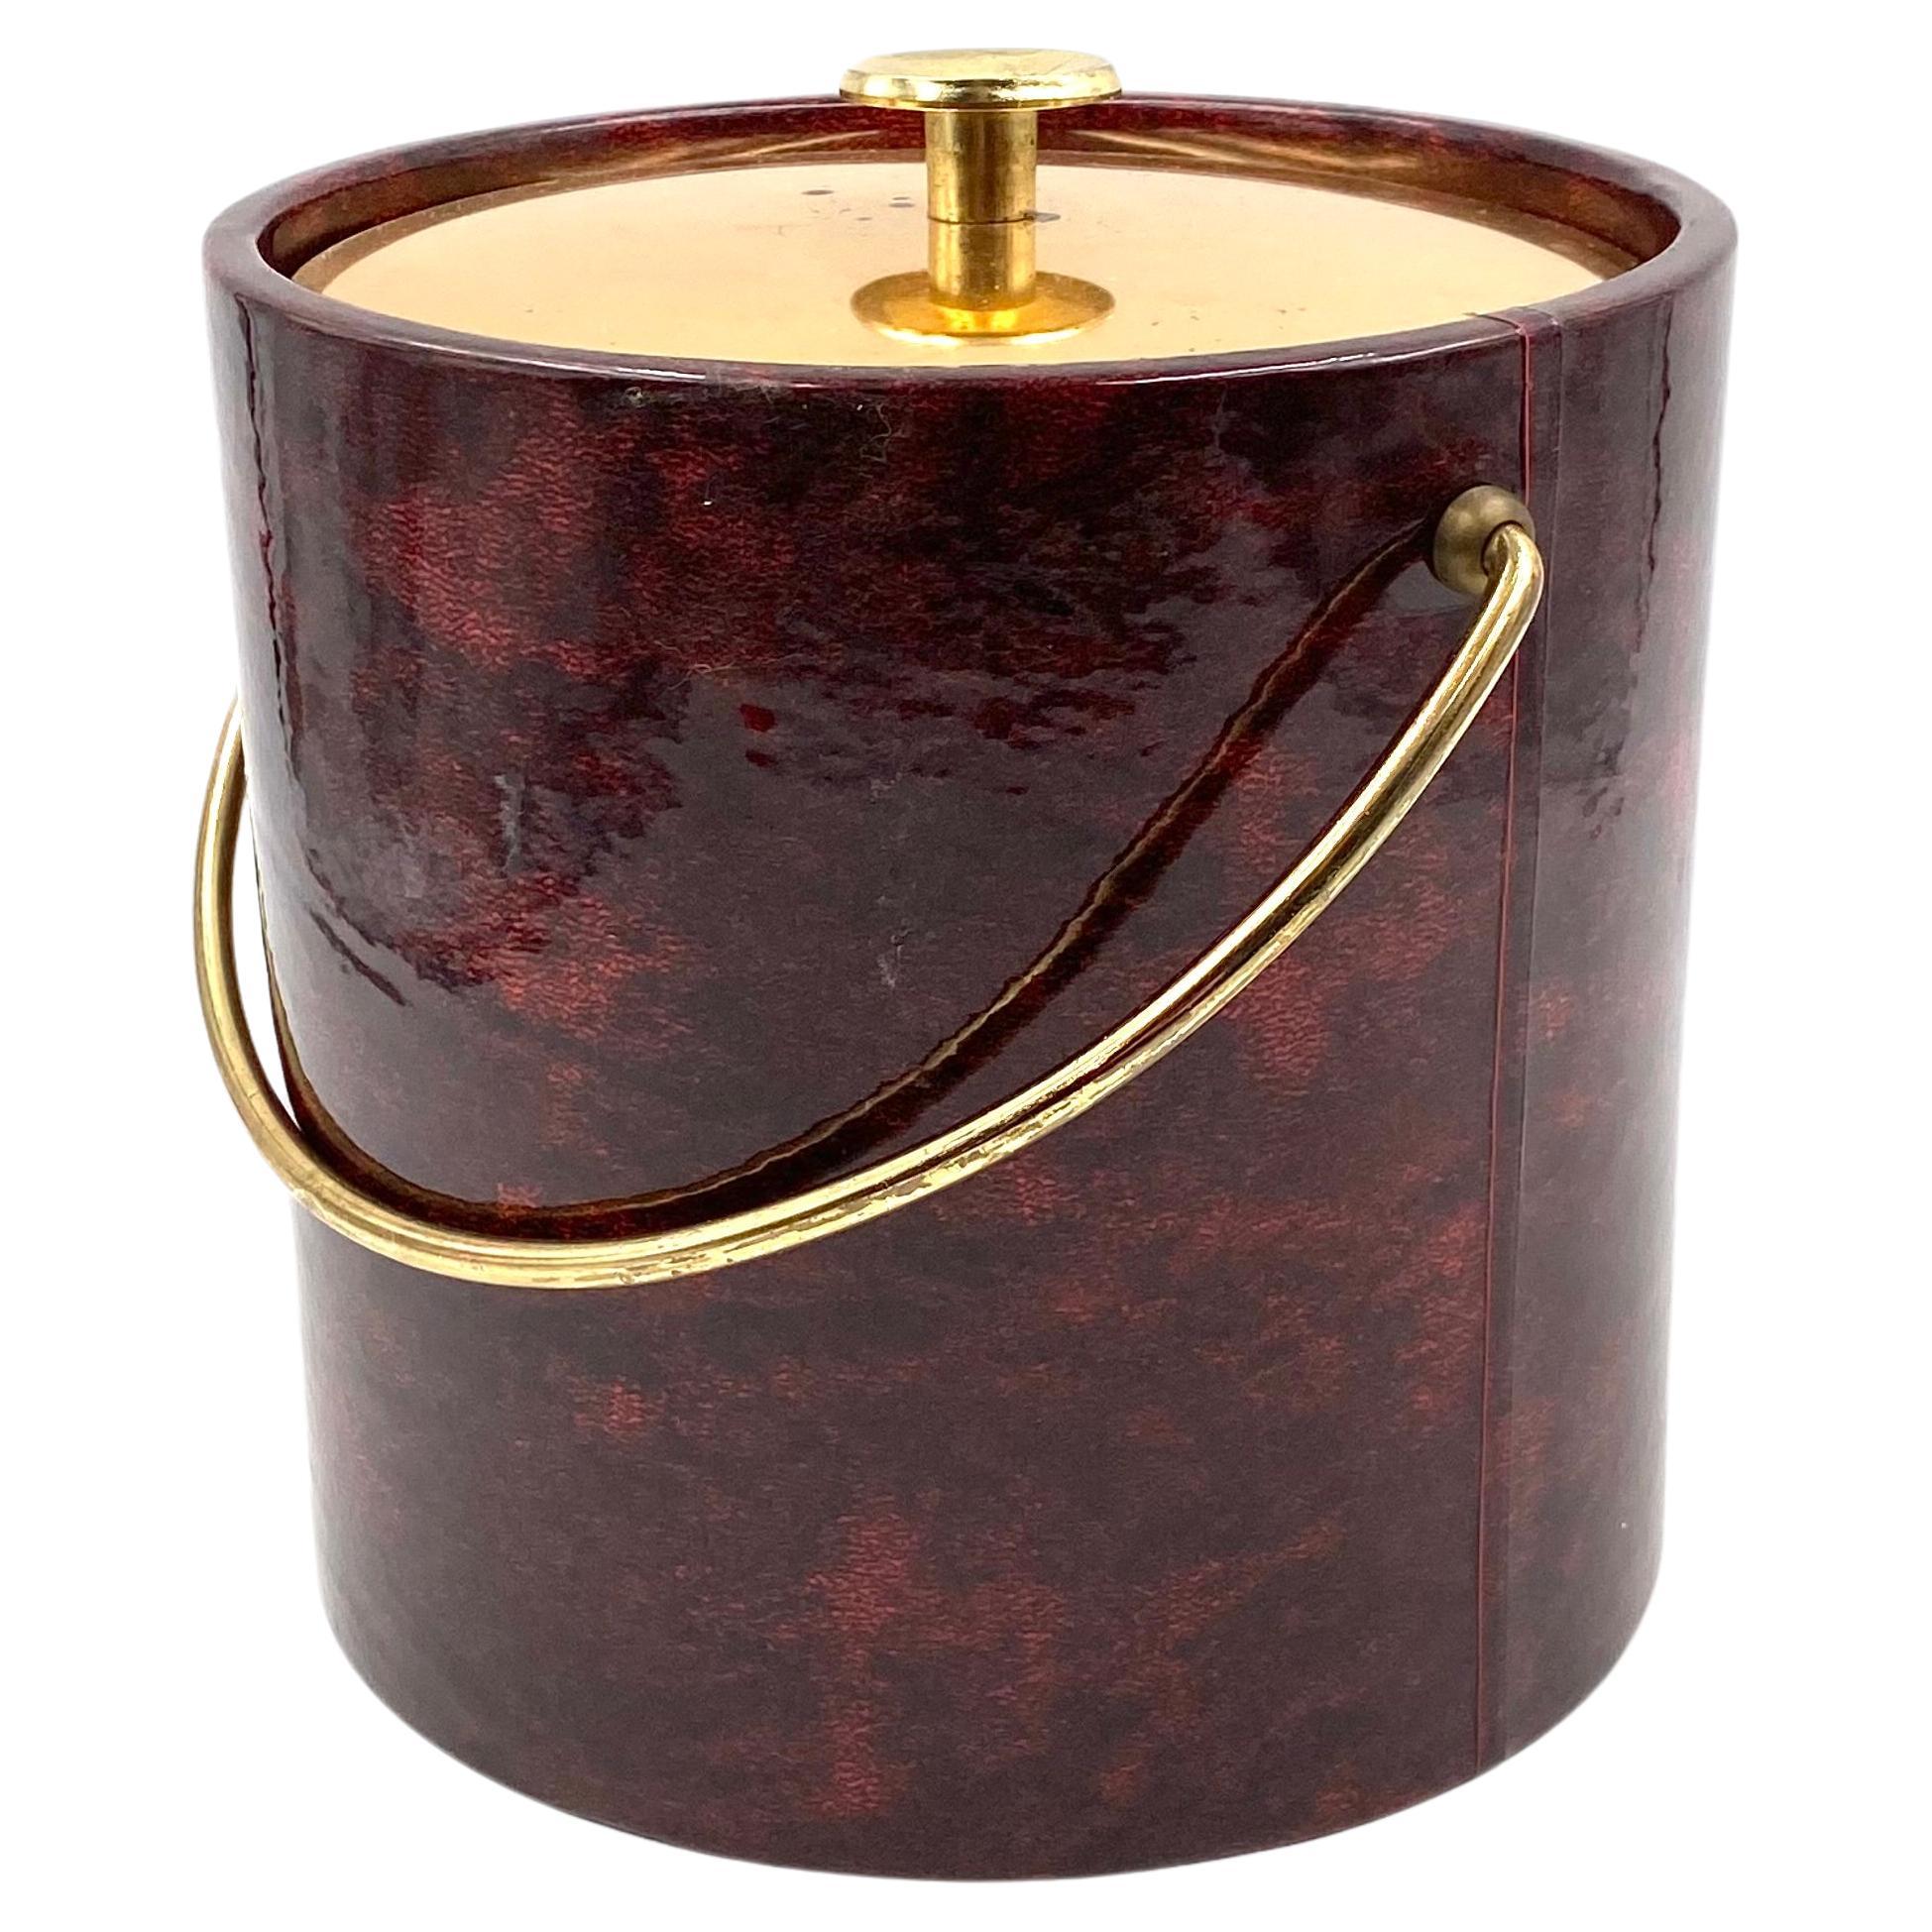 Aldo Tura, Brass and red Parchment cooler / Ice bucket, Italy 1960s